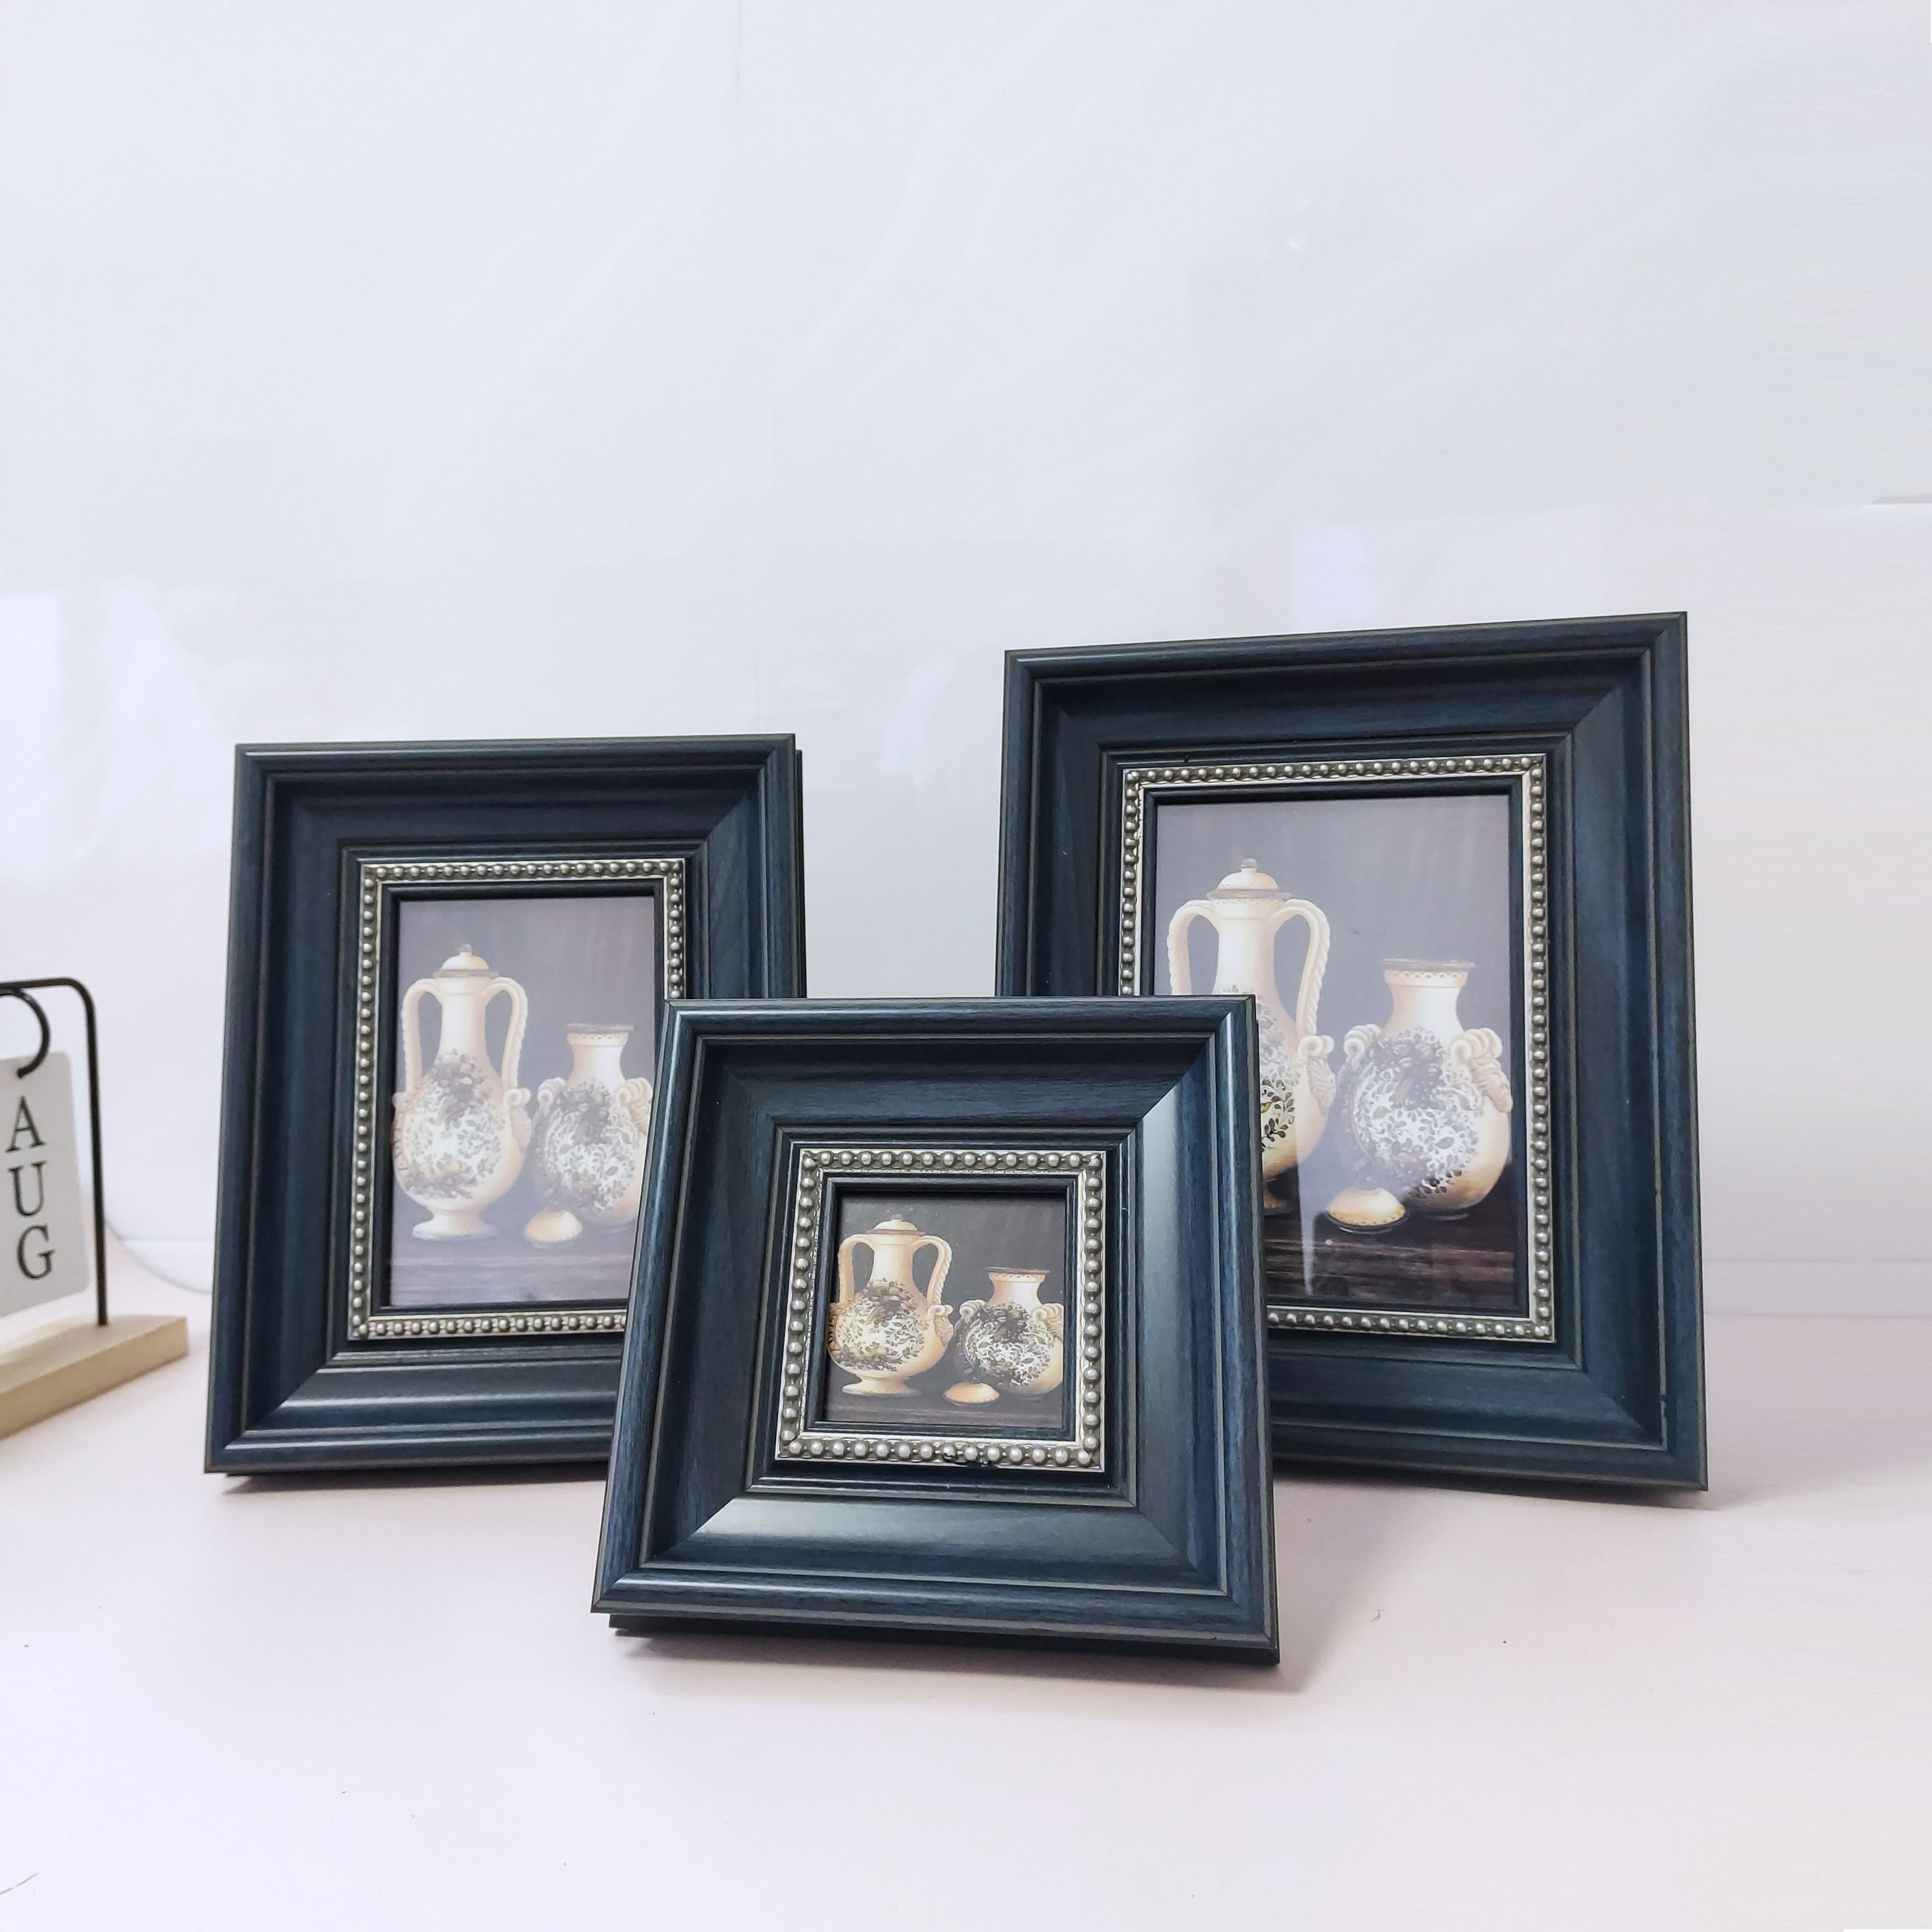 Pictures Frames Art Buy Pictures Frames Art At Best Price In Malaysia Www Lazada Com My